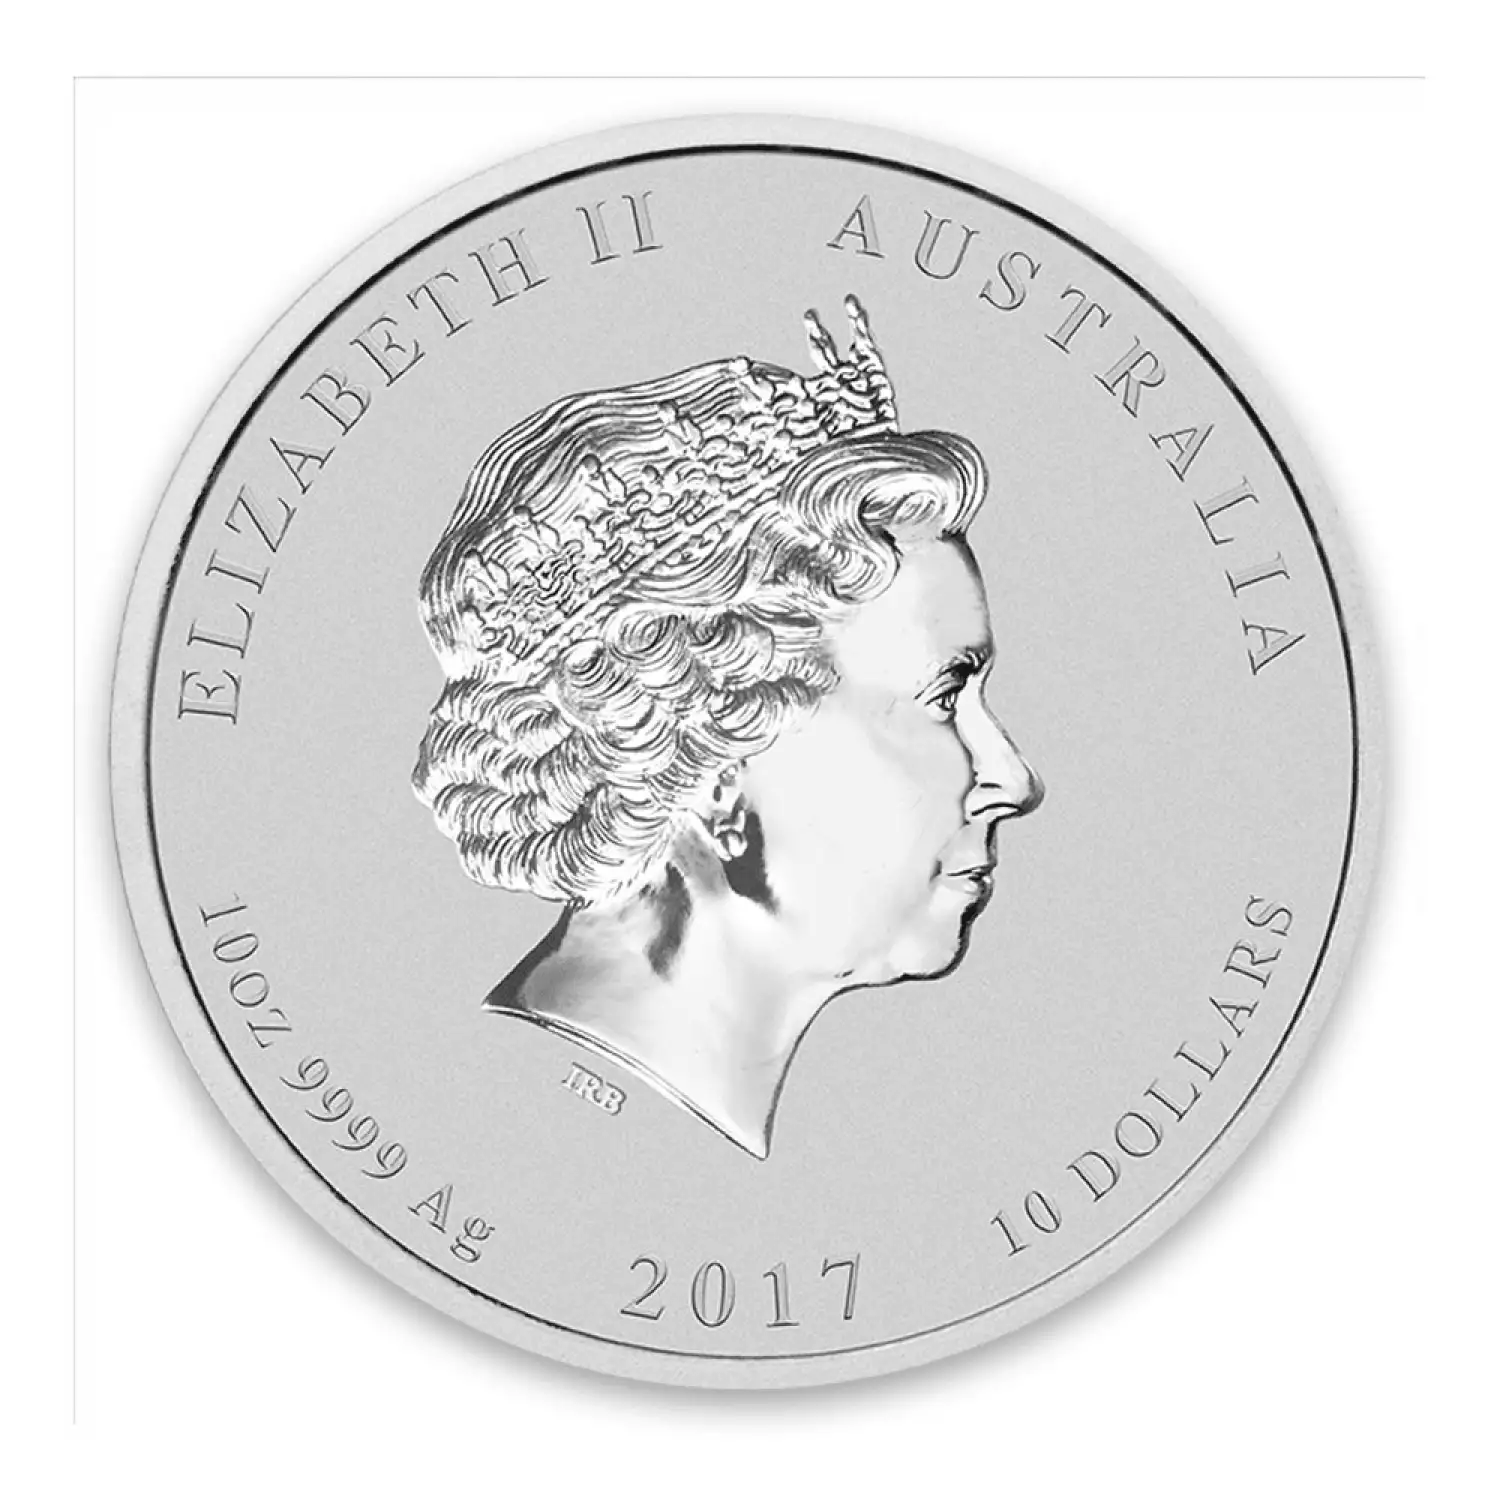 2017 10 oz Australian Perth Mint Silver Lunar II: Year of the Rooster (2)